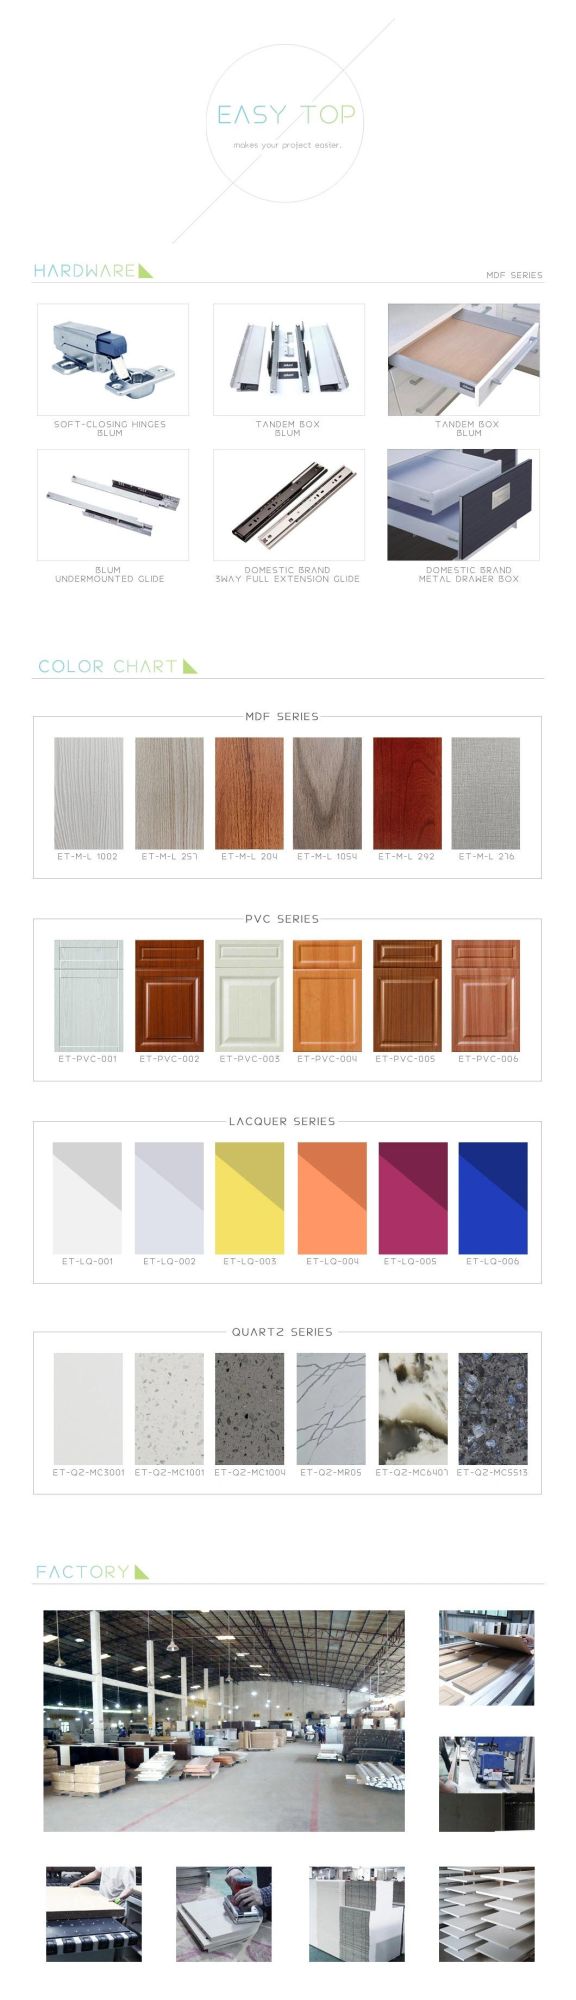 Cabinets Drawing Slab Design White Laminate Lacquer Door Kitchen Cabinets